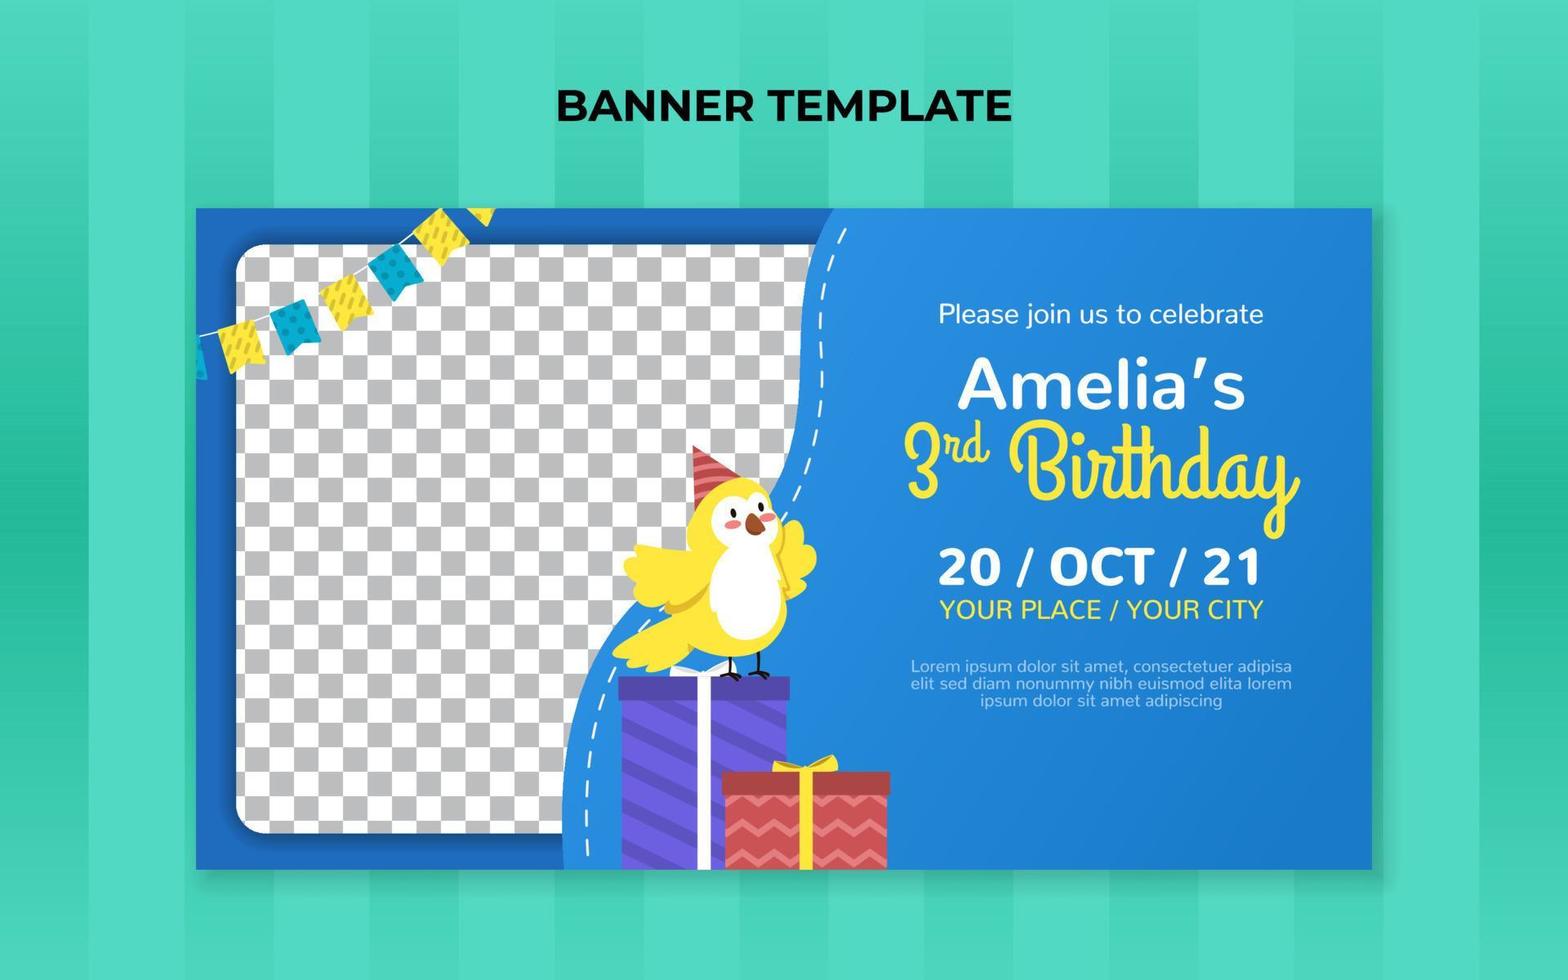 Kids birthday banner template. Suitable for birthday invitation or any other kids event vector